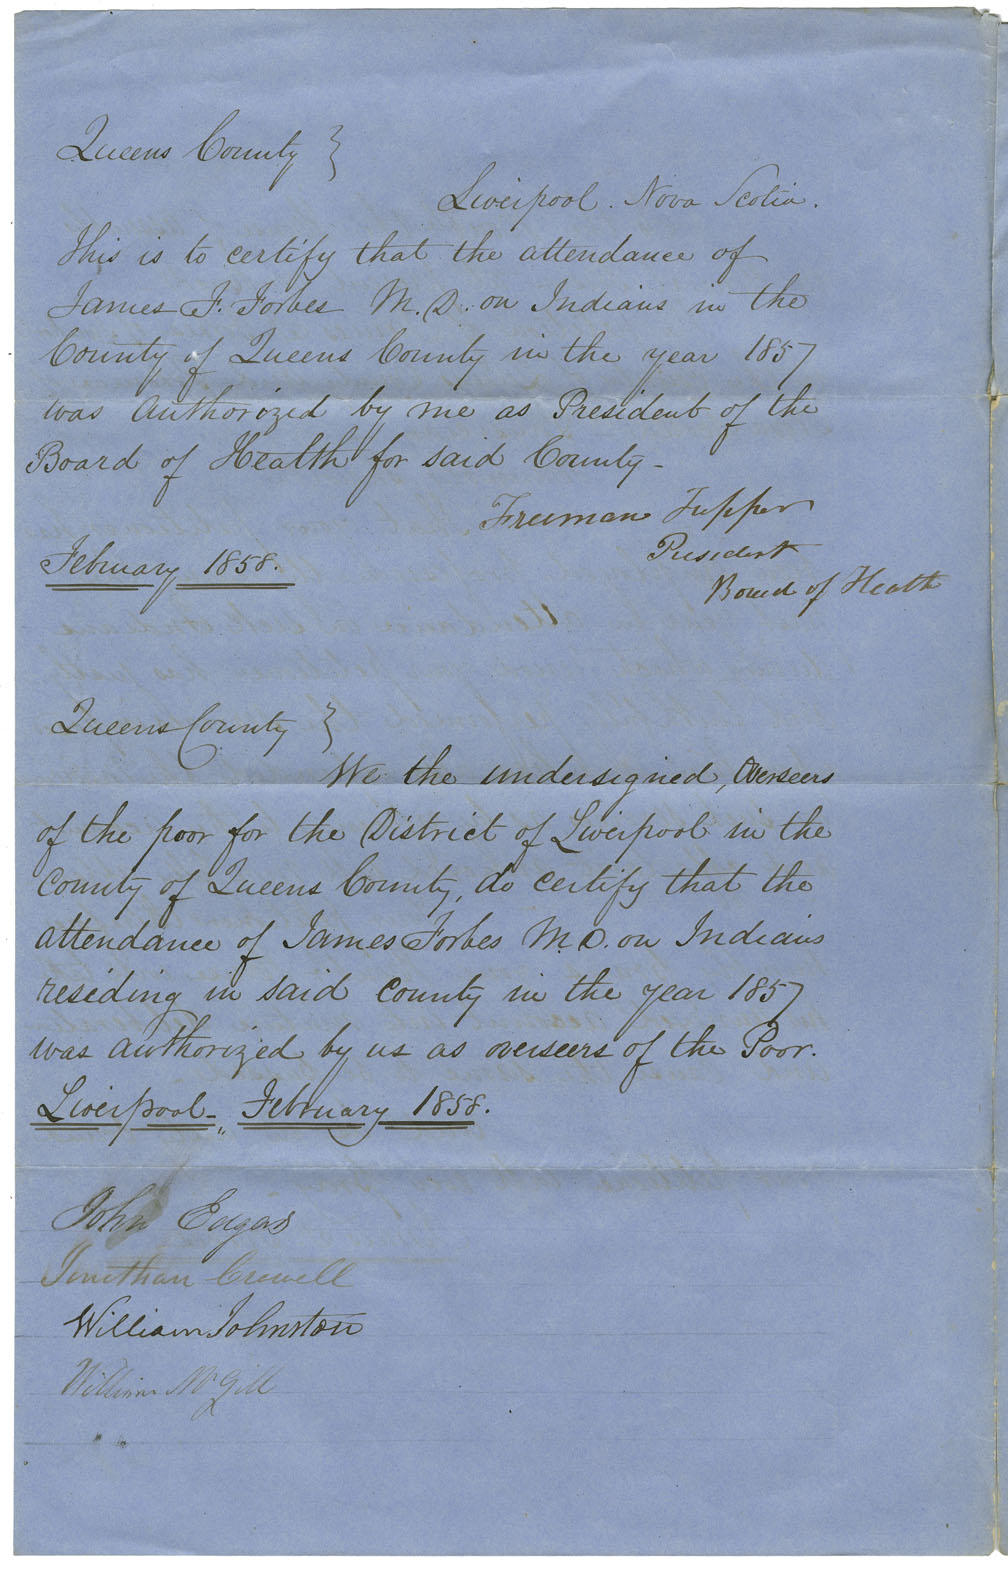 Petition of Dr. James F. Forbes of Liverpool for money for services to Mi'kmaq.